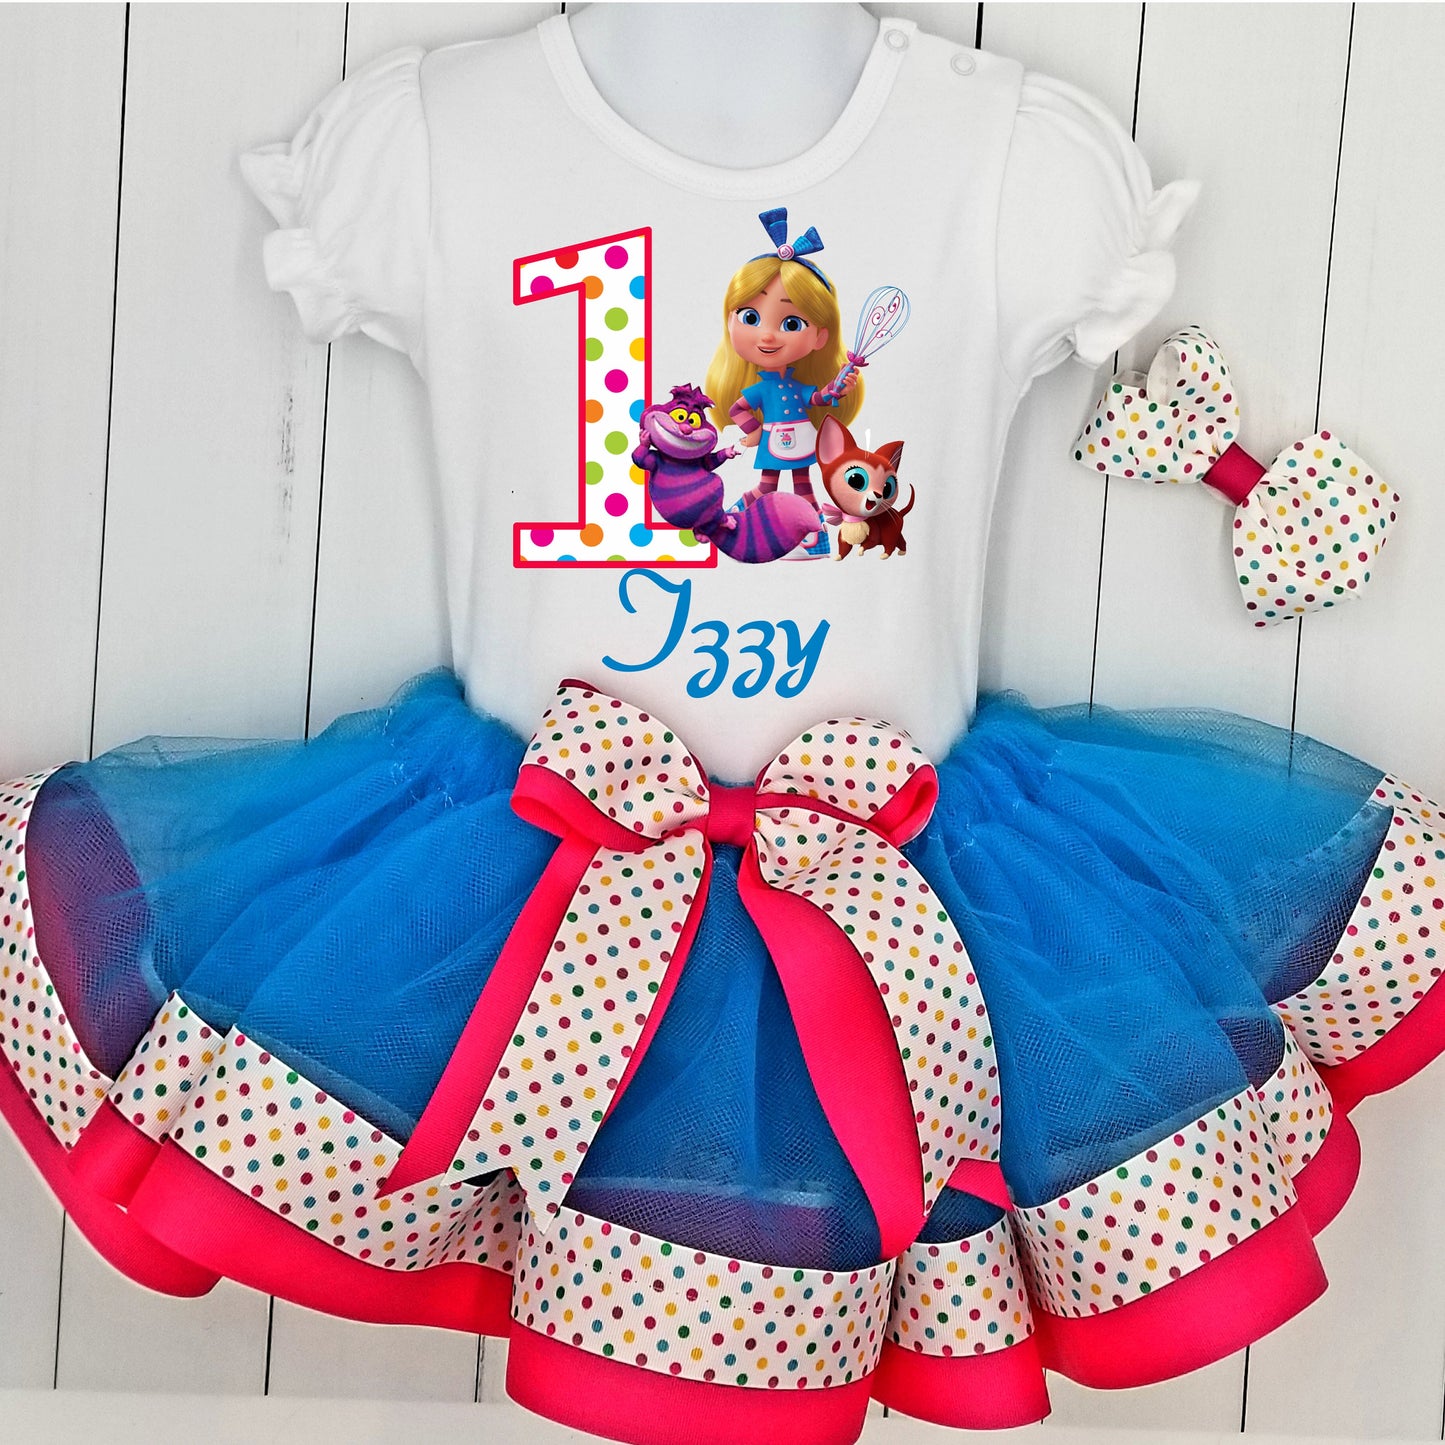 Girls ALICE BAKERY 3 Piece Ribbon Tutu Outfit | ALICE Ribbon Tutu, Tshirt or Onesie and Matching Hair Bow | Adorable!